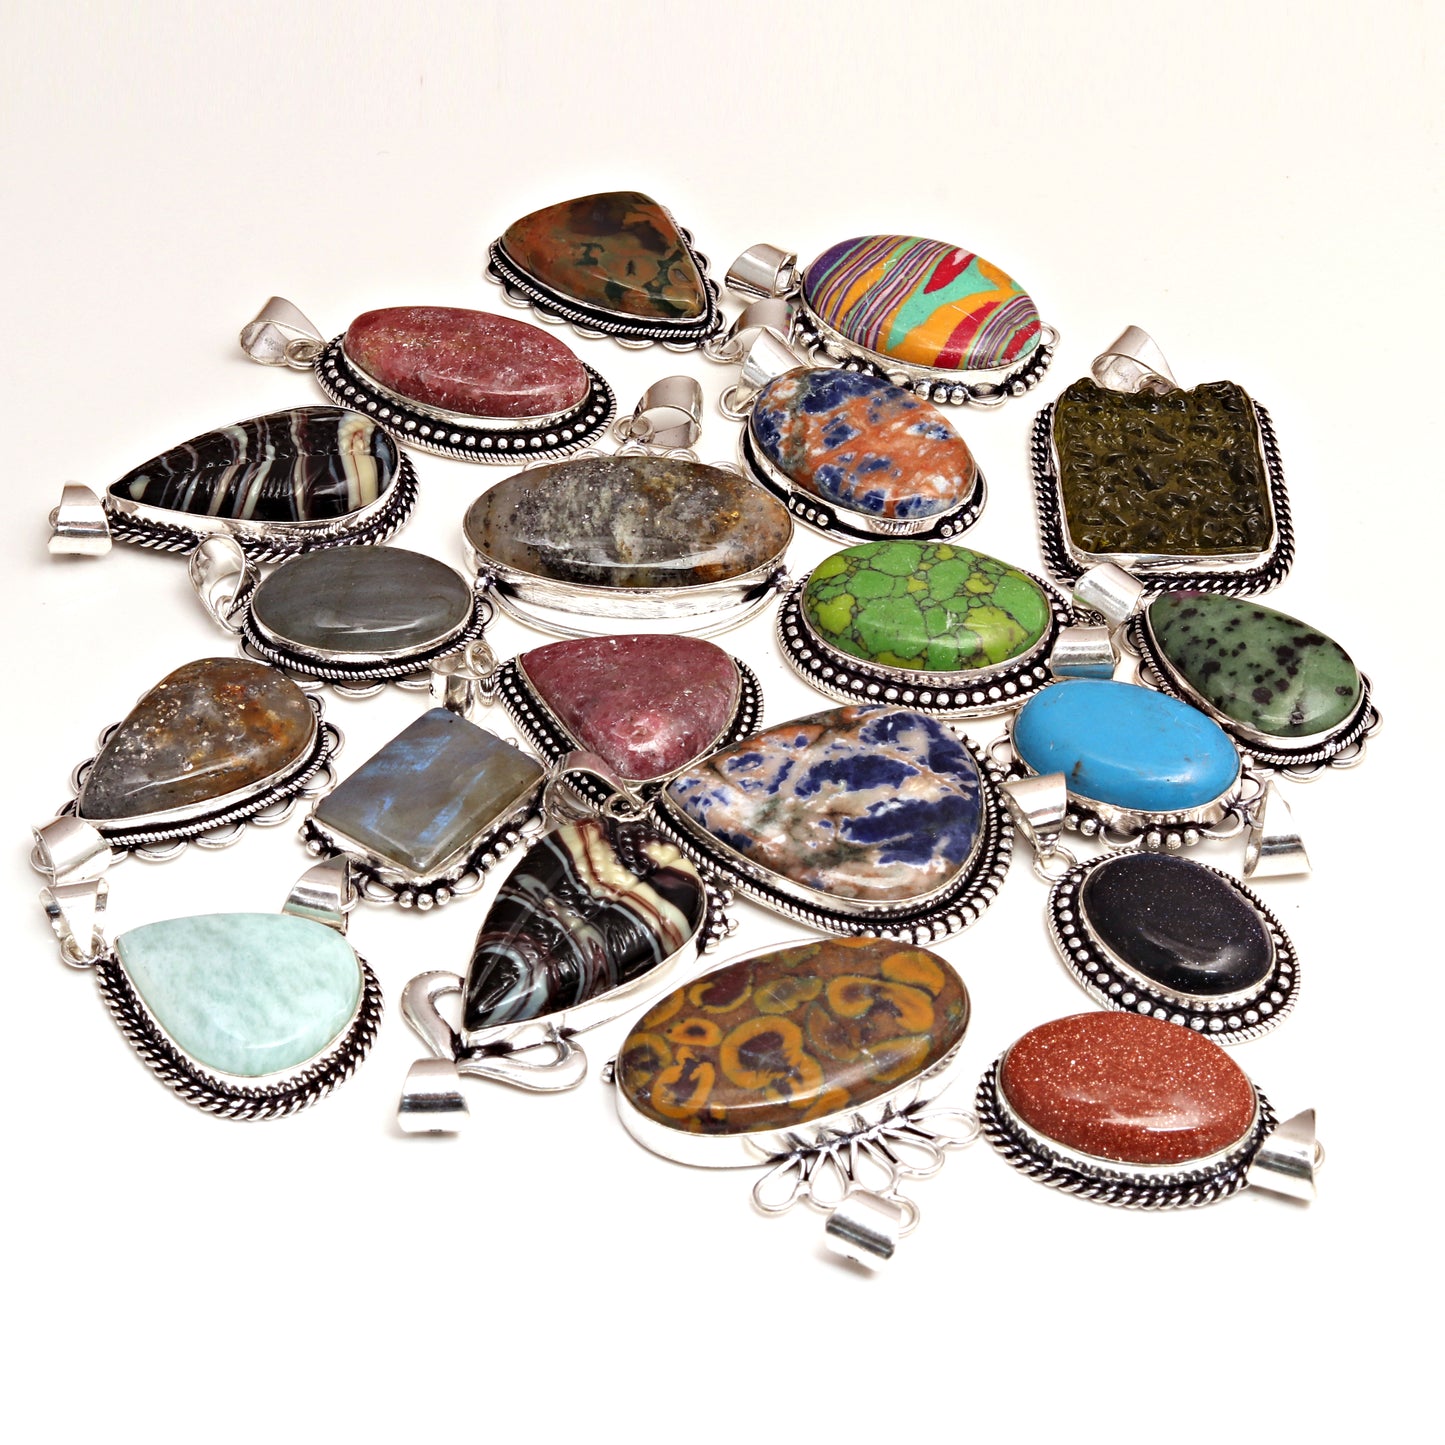 20 Pcs Lot 925 Sterling Silver Mix Gemstone Lot Pendant , Mix Designs For Men's & Women's Silver Jewelry Necklace